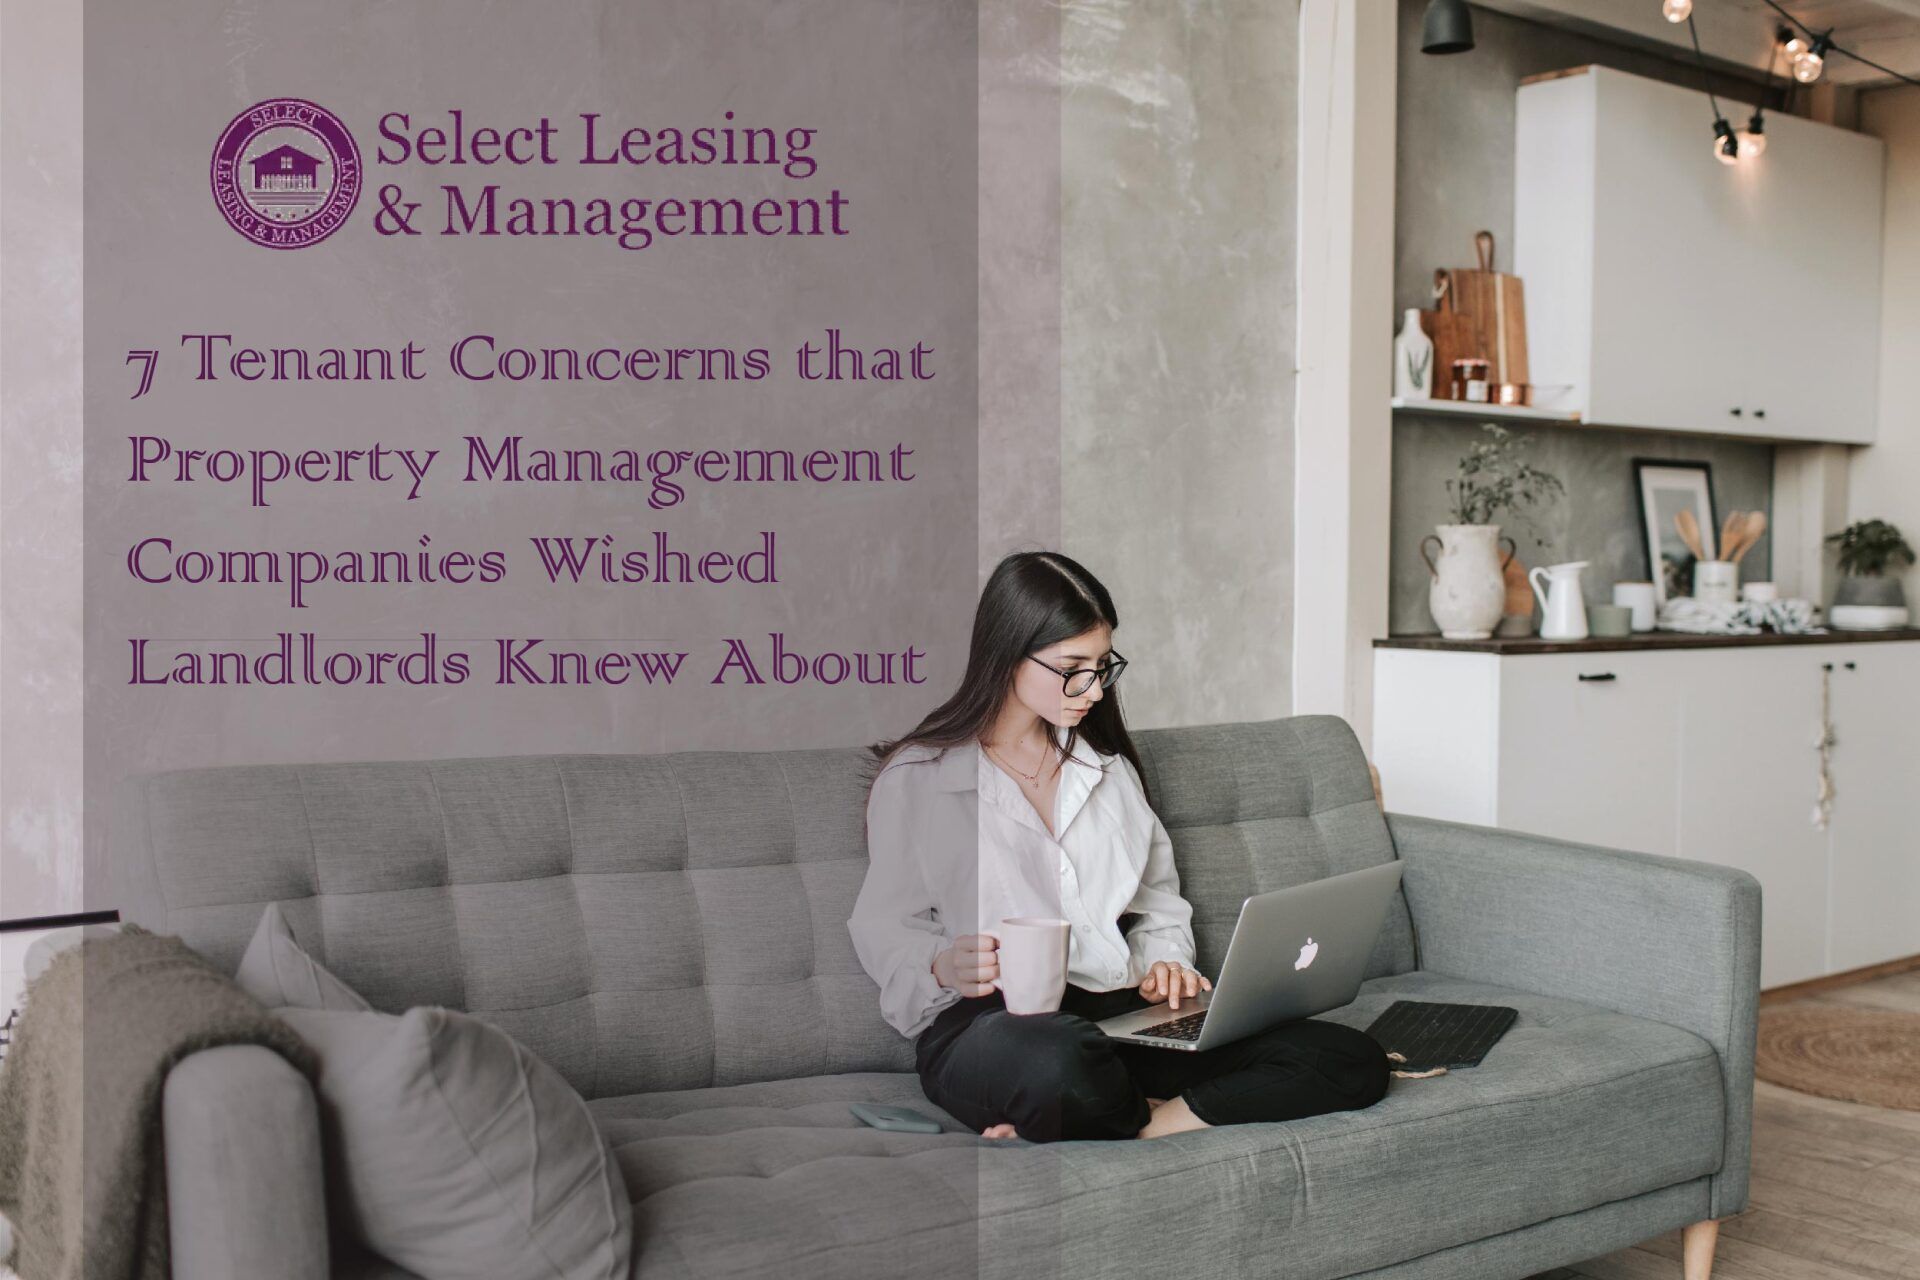 Tenant Concerns that Property Management Companies Wished Landlords Knew About